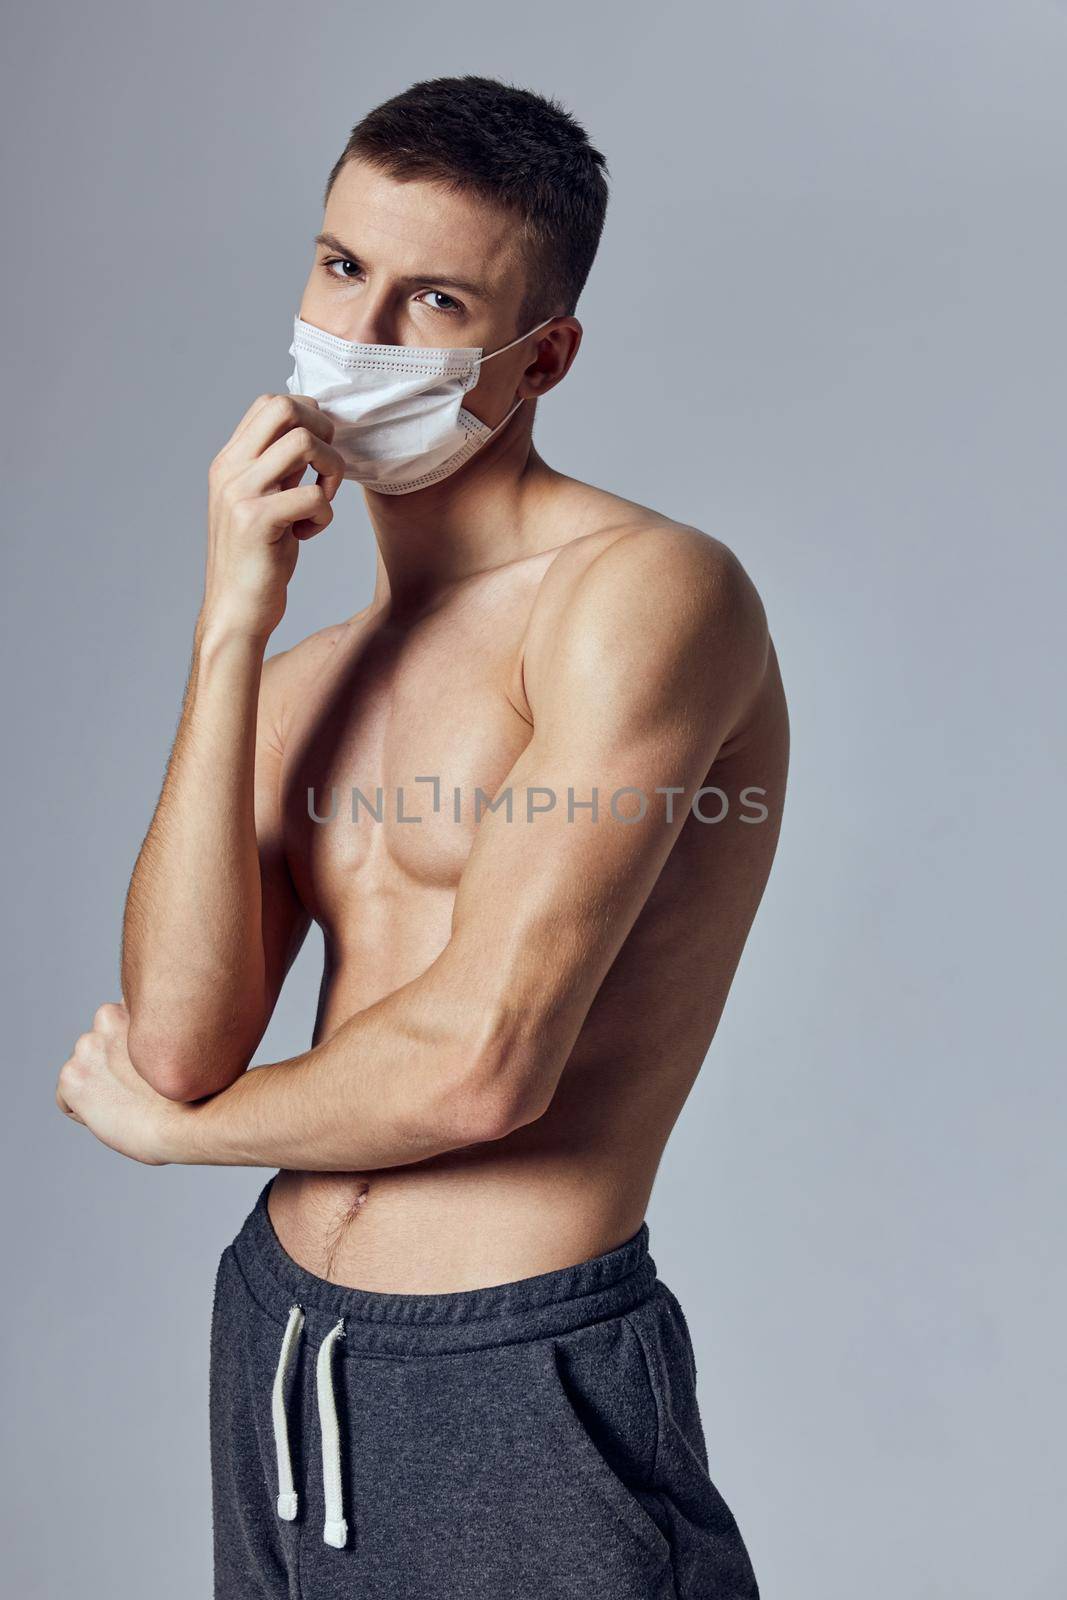 athletic man with muscular body medical mask black shorts . High quality photo